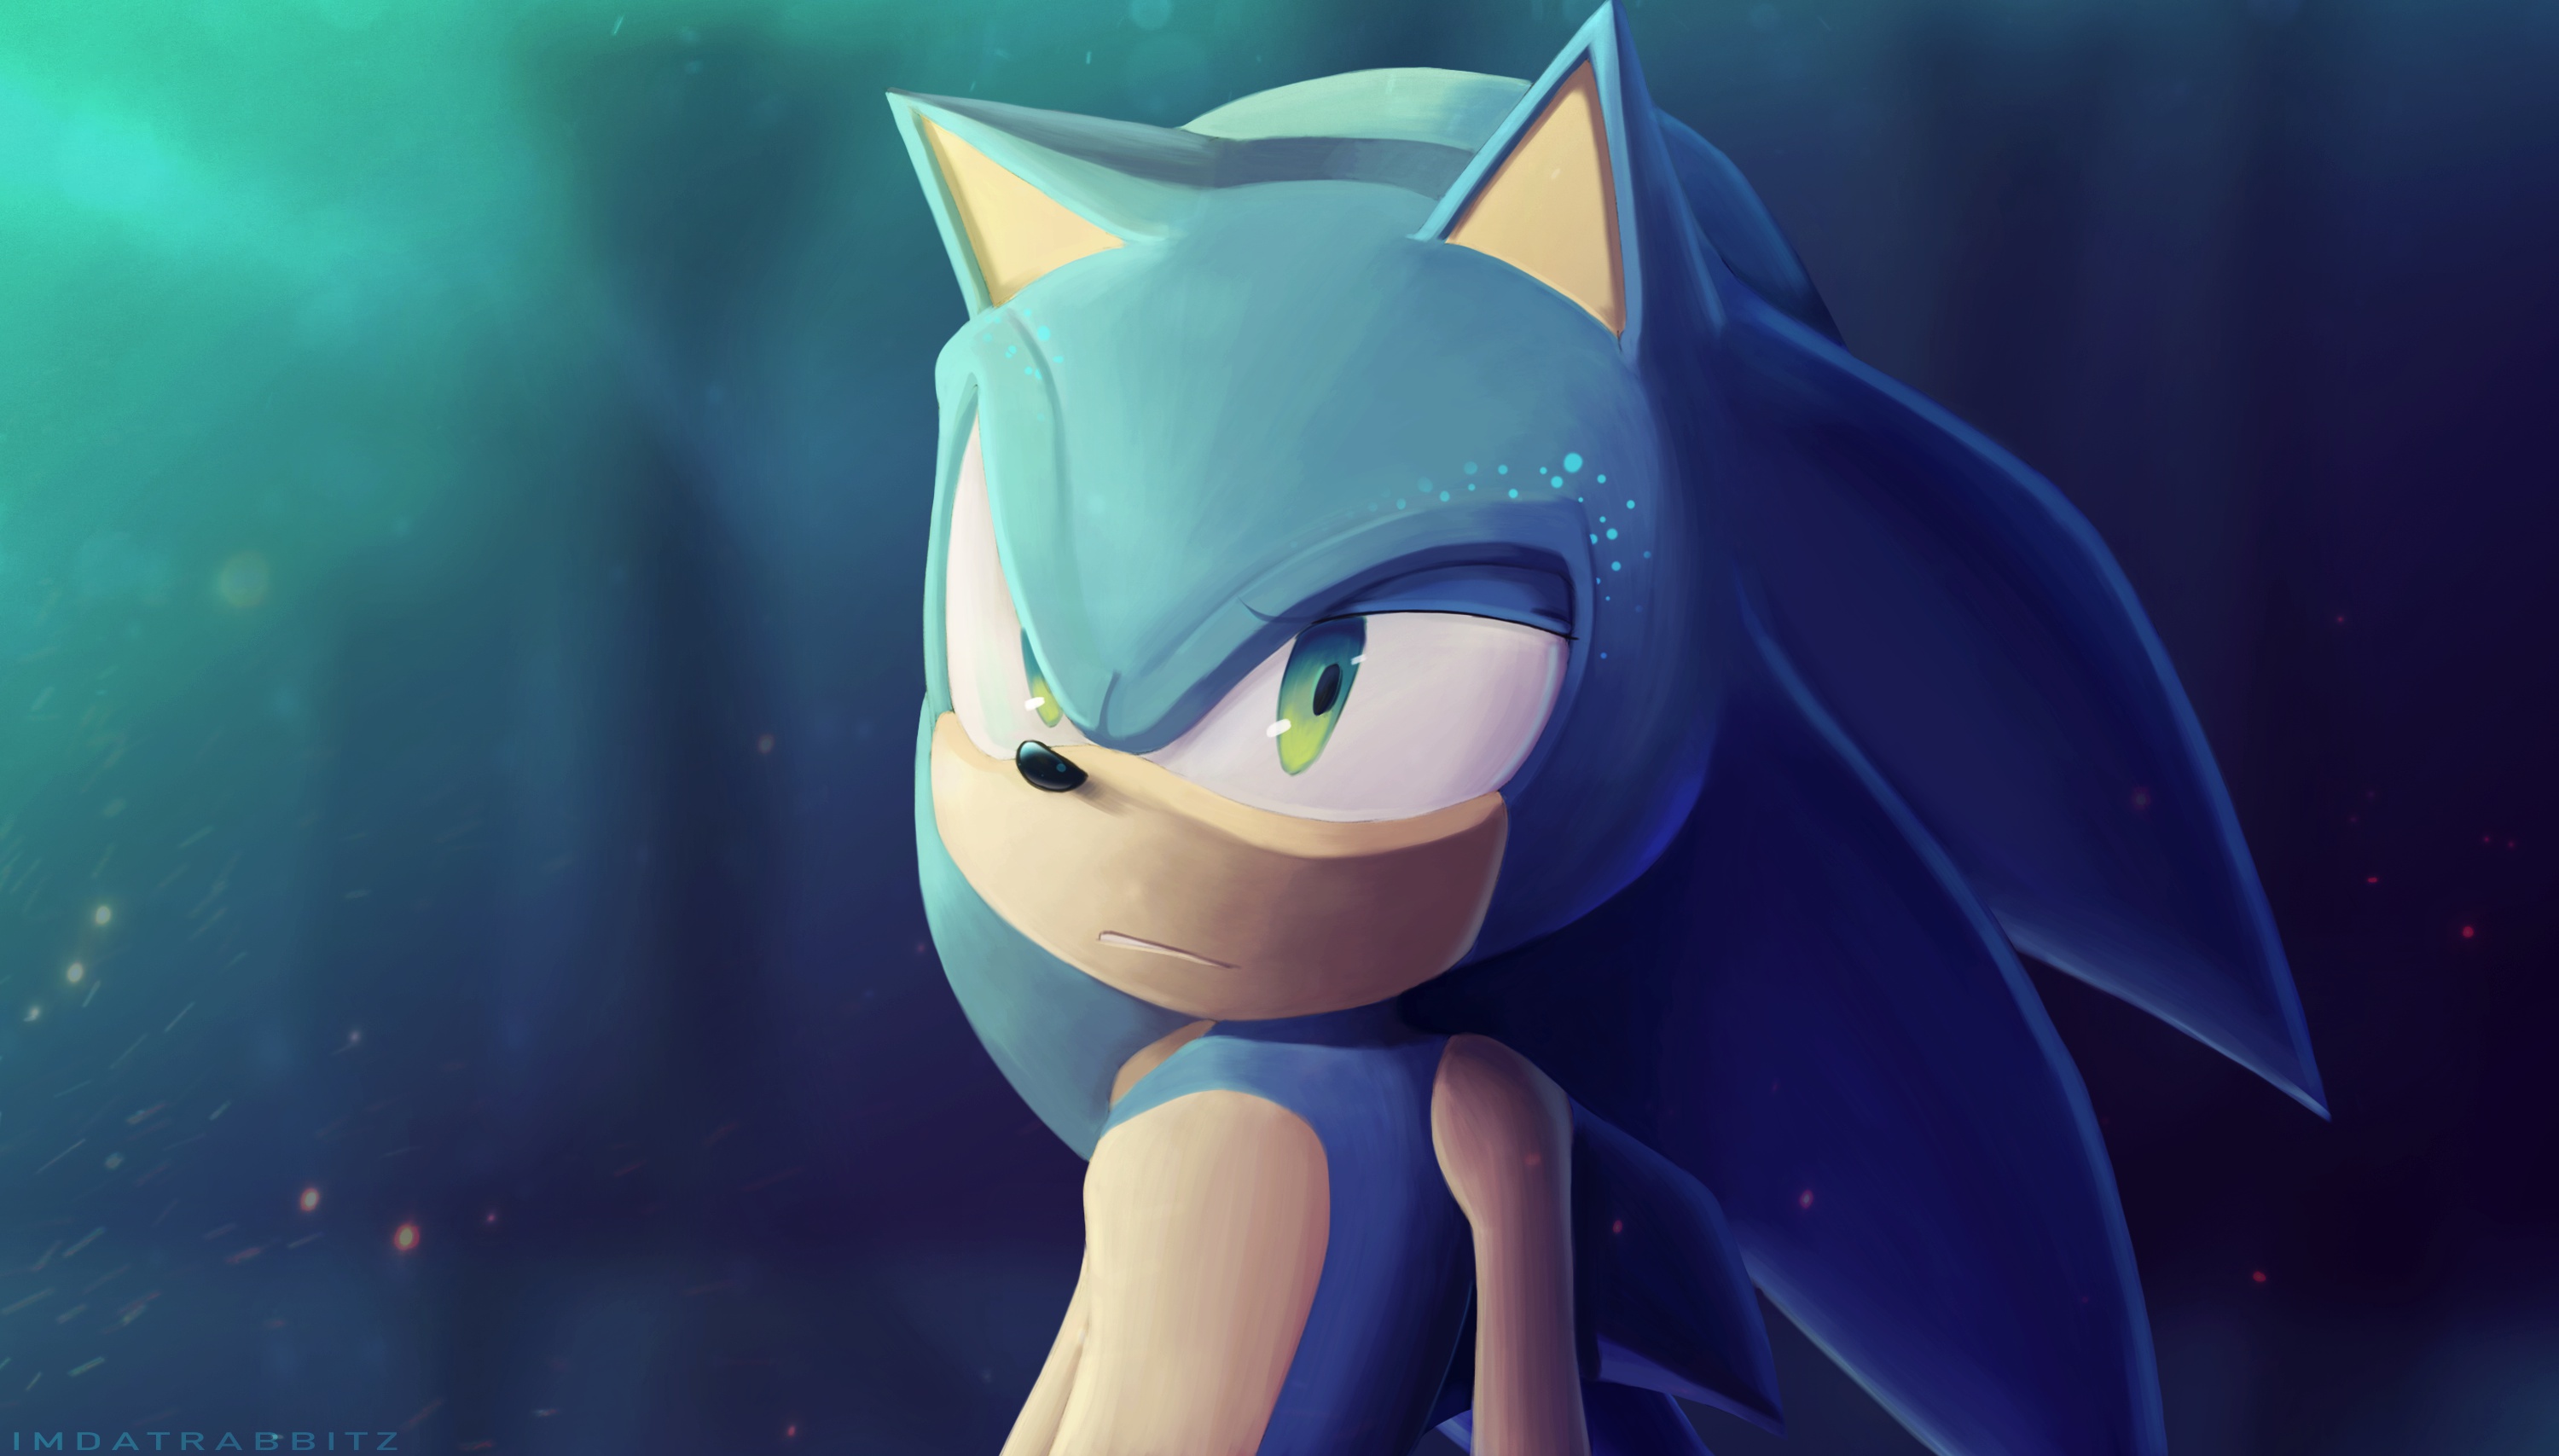 Sonic The Hedgehog Art, HD Movies, 4k Wallpapers, Images, Backgrounds